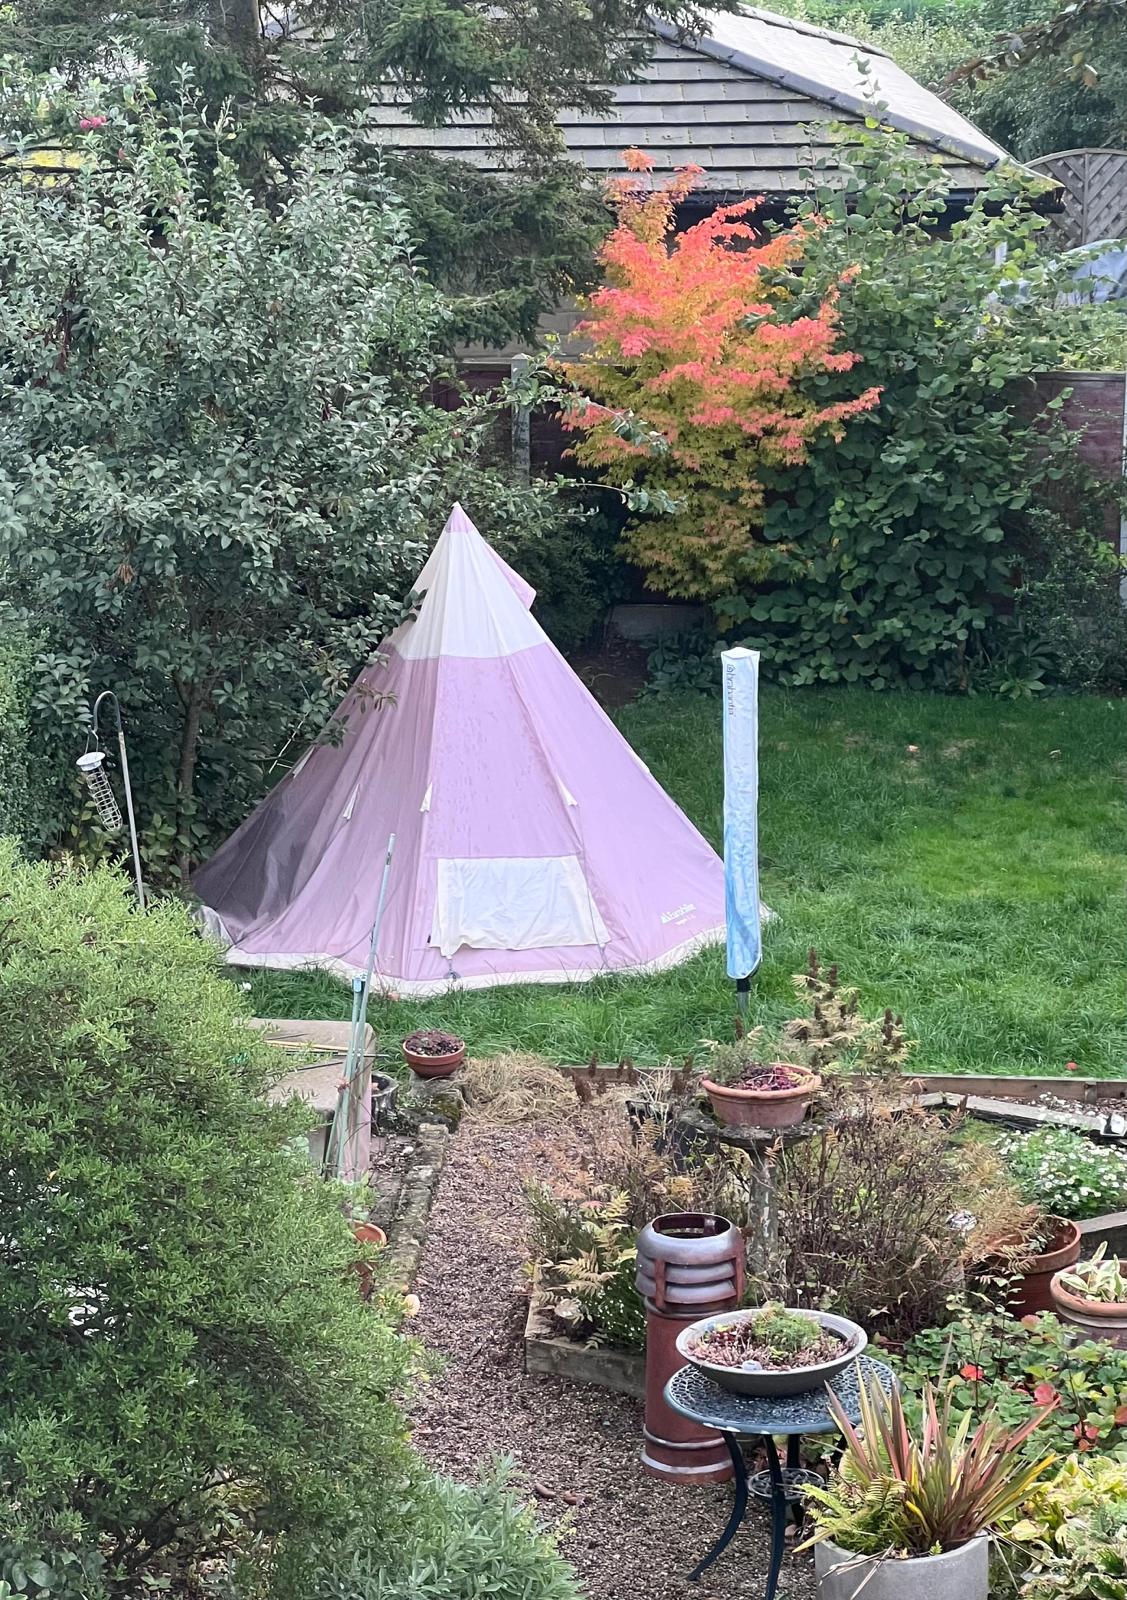 Billy's original teepee with pink fabric at the end of his garden